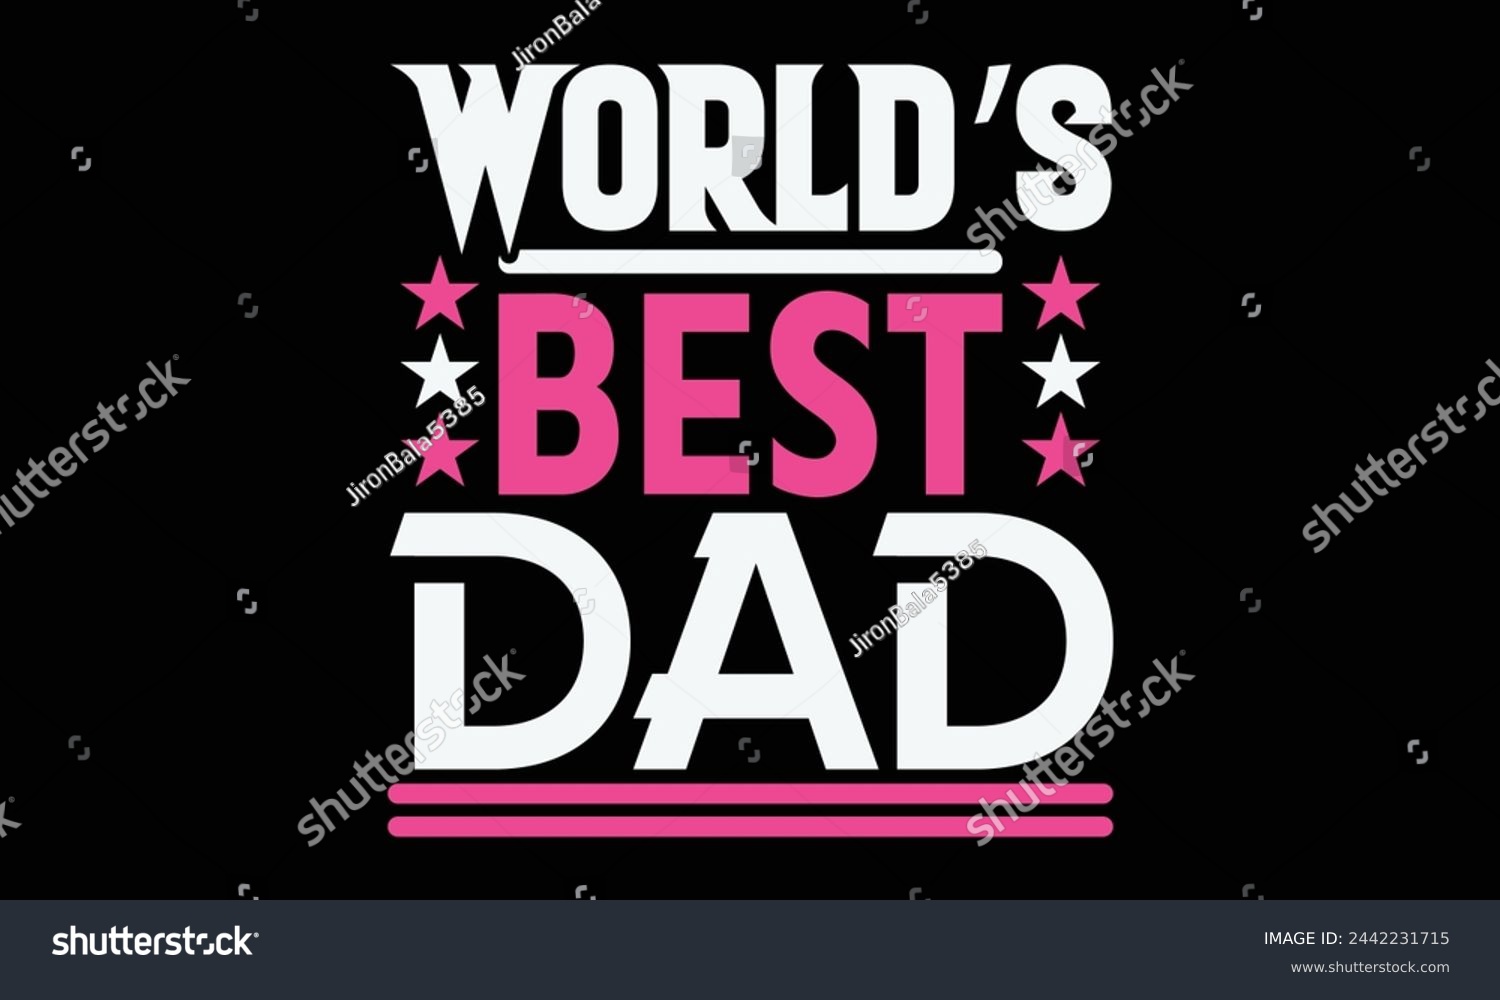 SVG of World’s best dad - Mom t-shirt design, isolated on white background, this illustration can be used as a print on t-shirts and bags, cover book, template, stationary or as a poster. svg